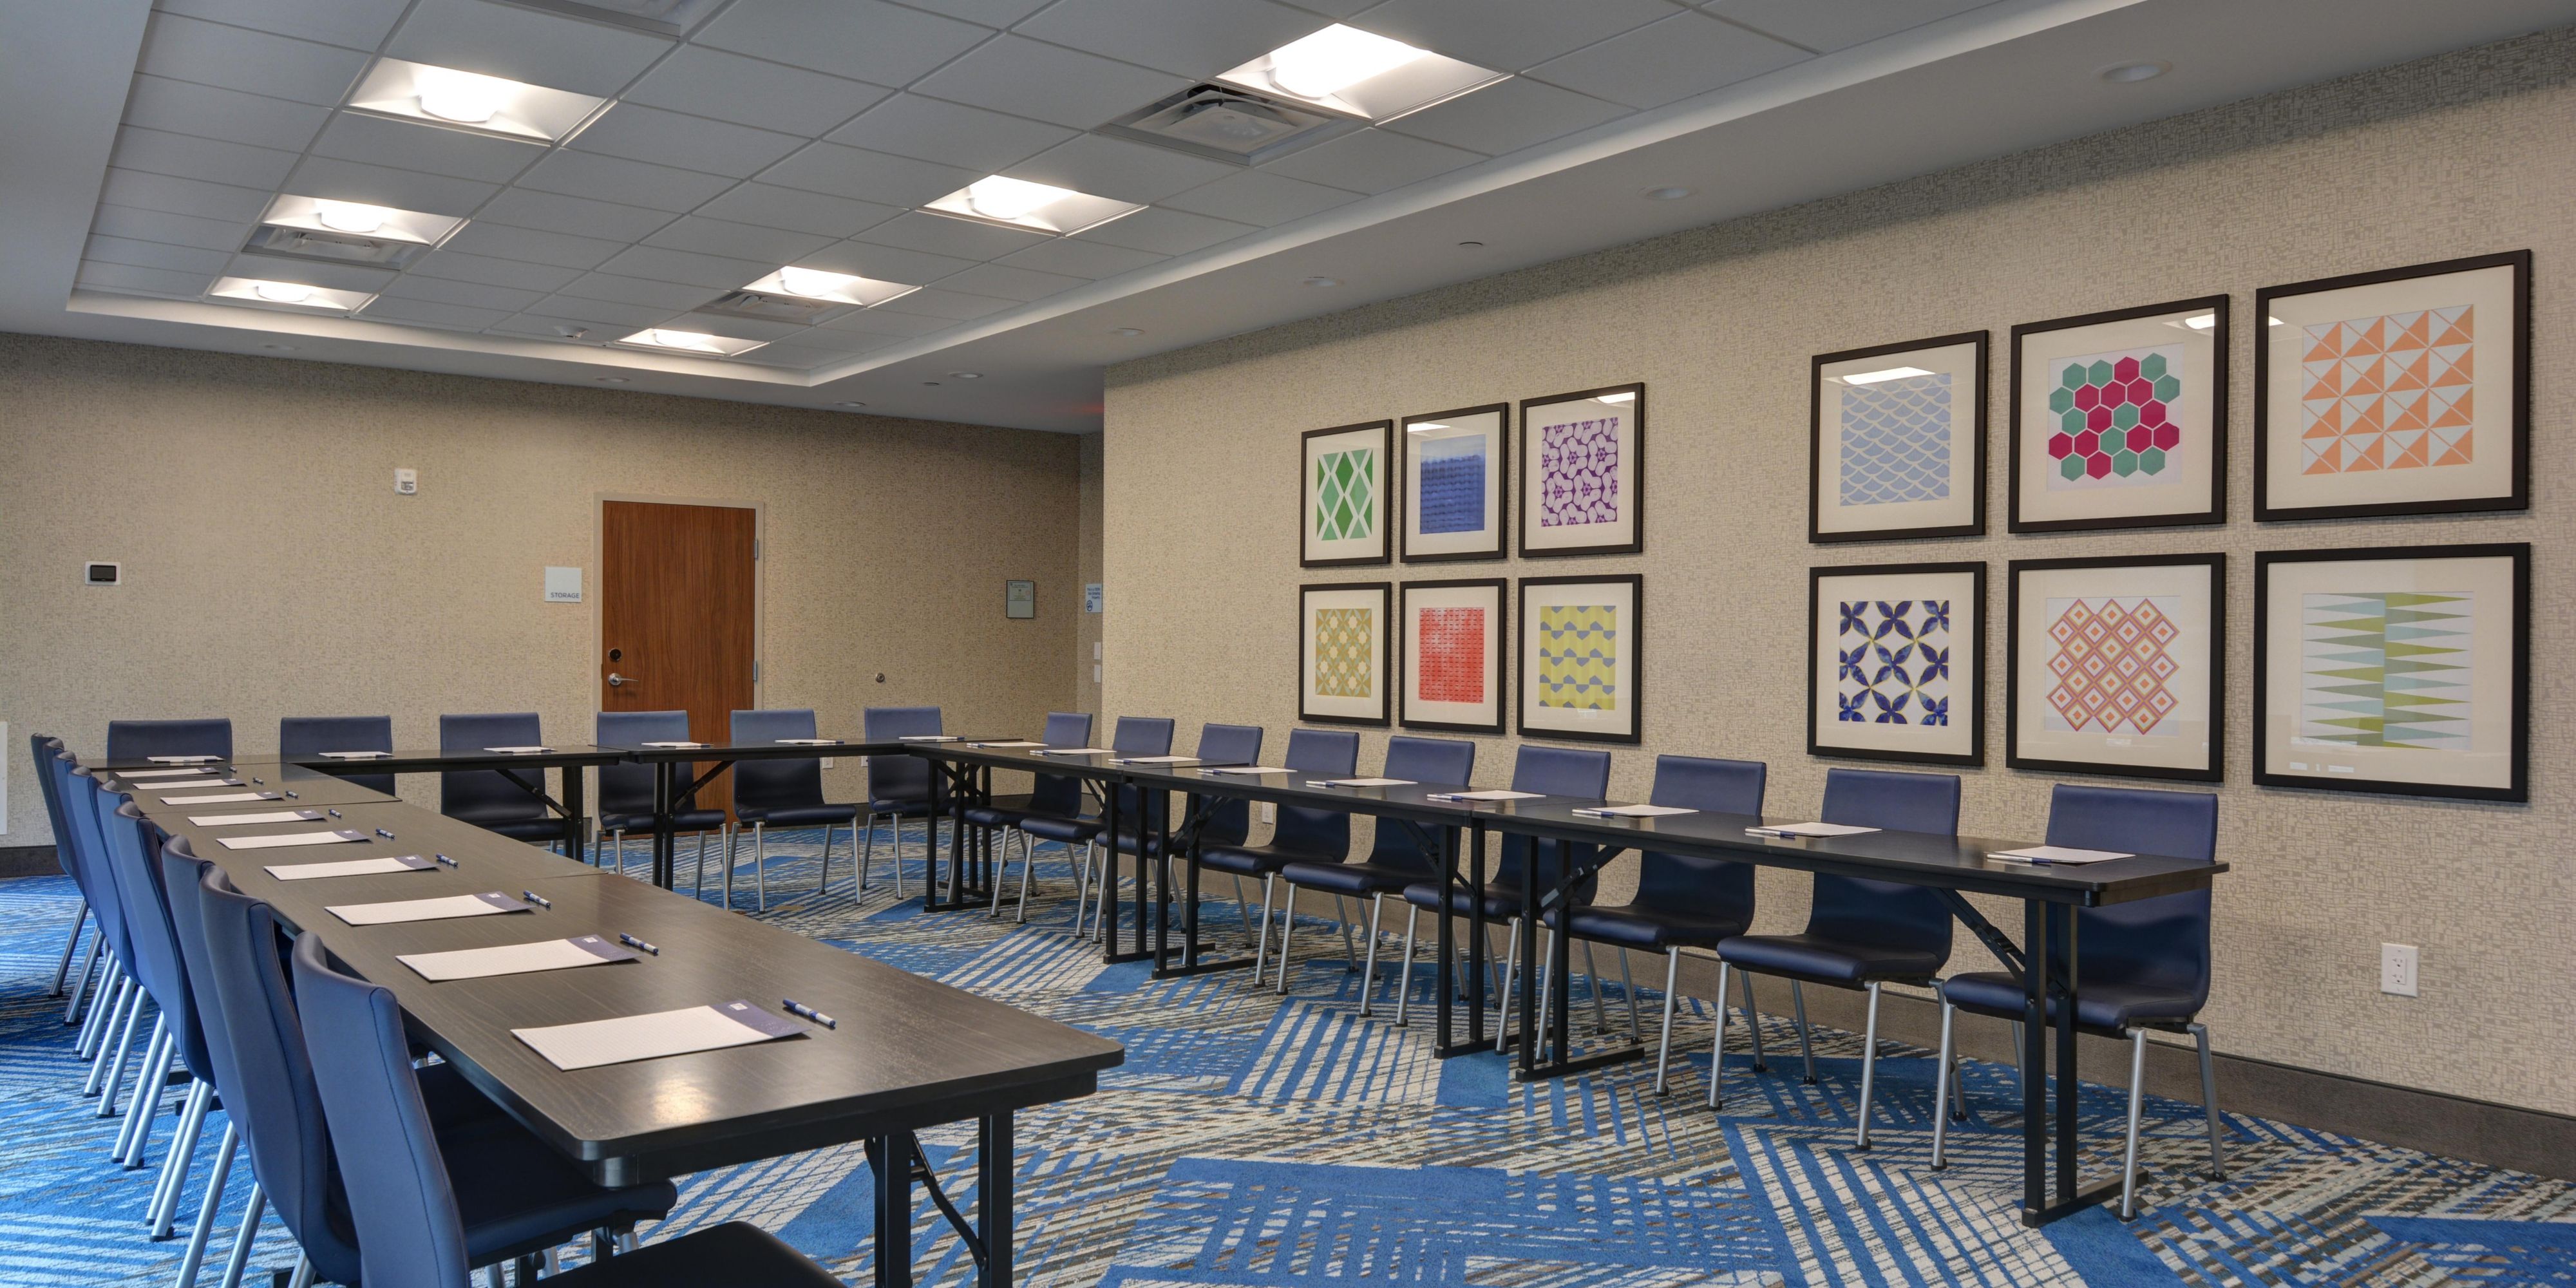 Come use our beautiful spacious meeting room for your next event. We can accommodate up to 45 guests. We are located near downtown Greenville where your team can enjoy so many activities in and around the area. We are close to theater, restaurants, and wildlife.